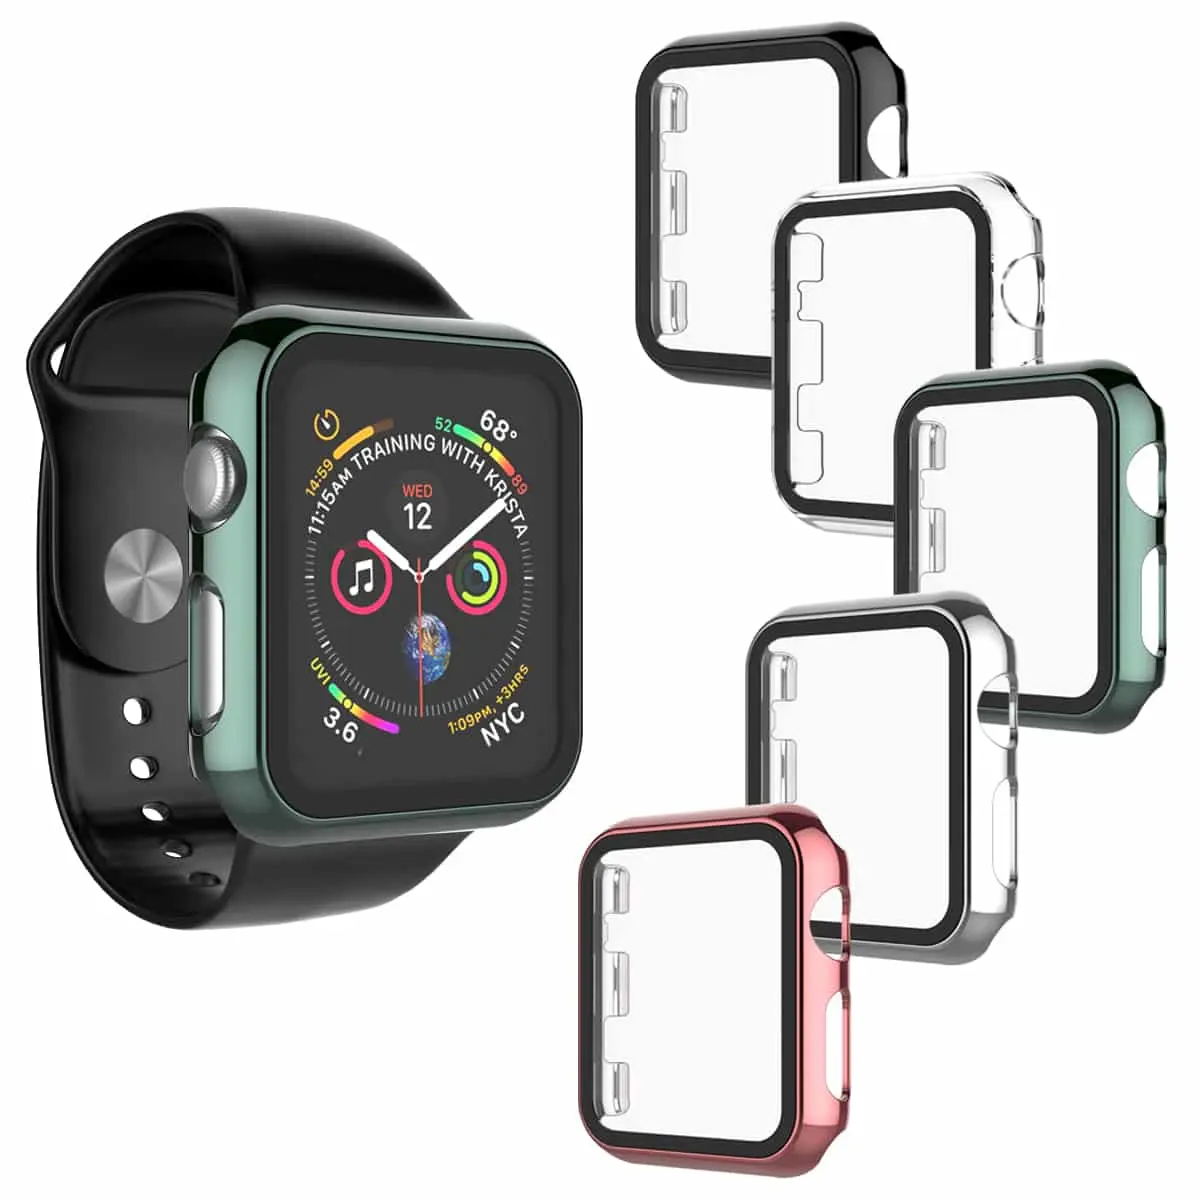 The best protective cases for Apple watch in 2022!